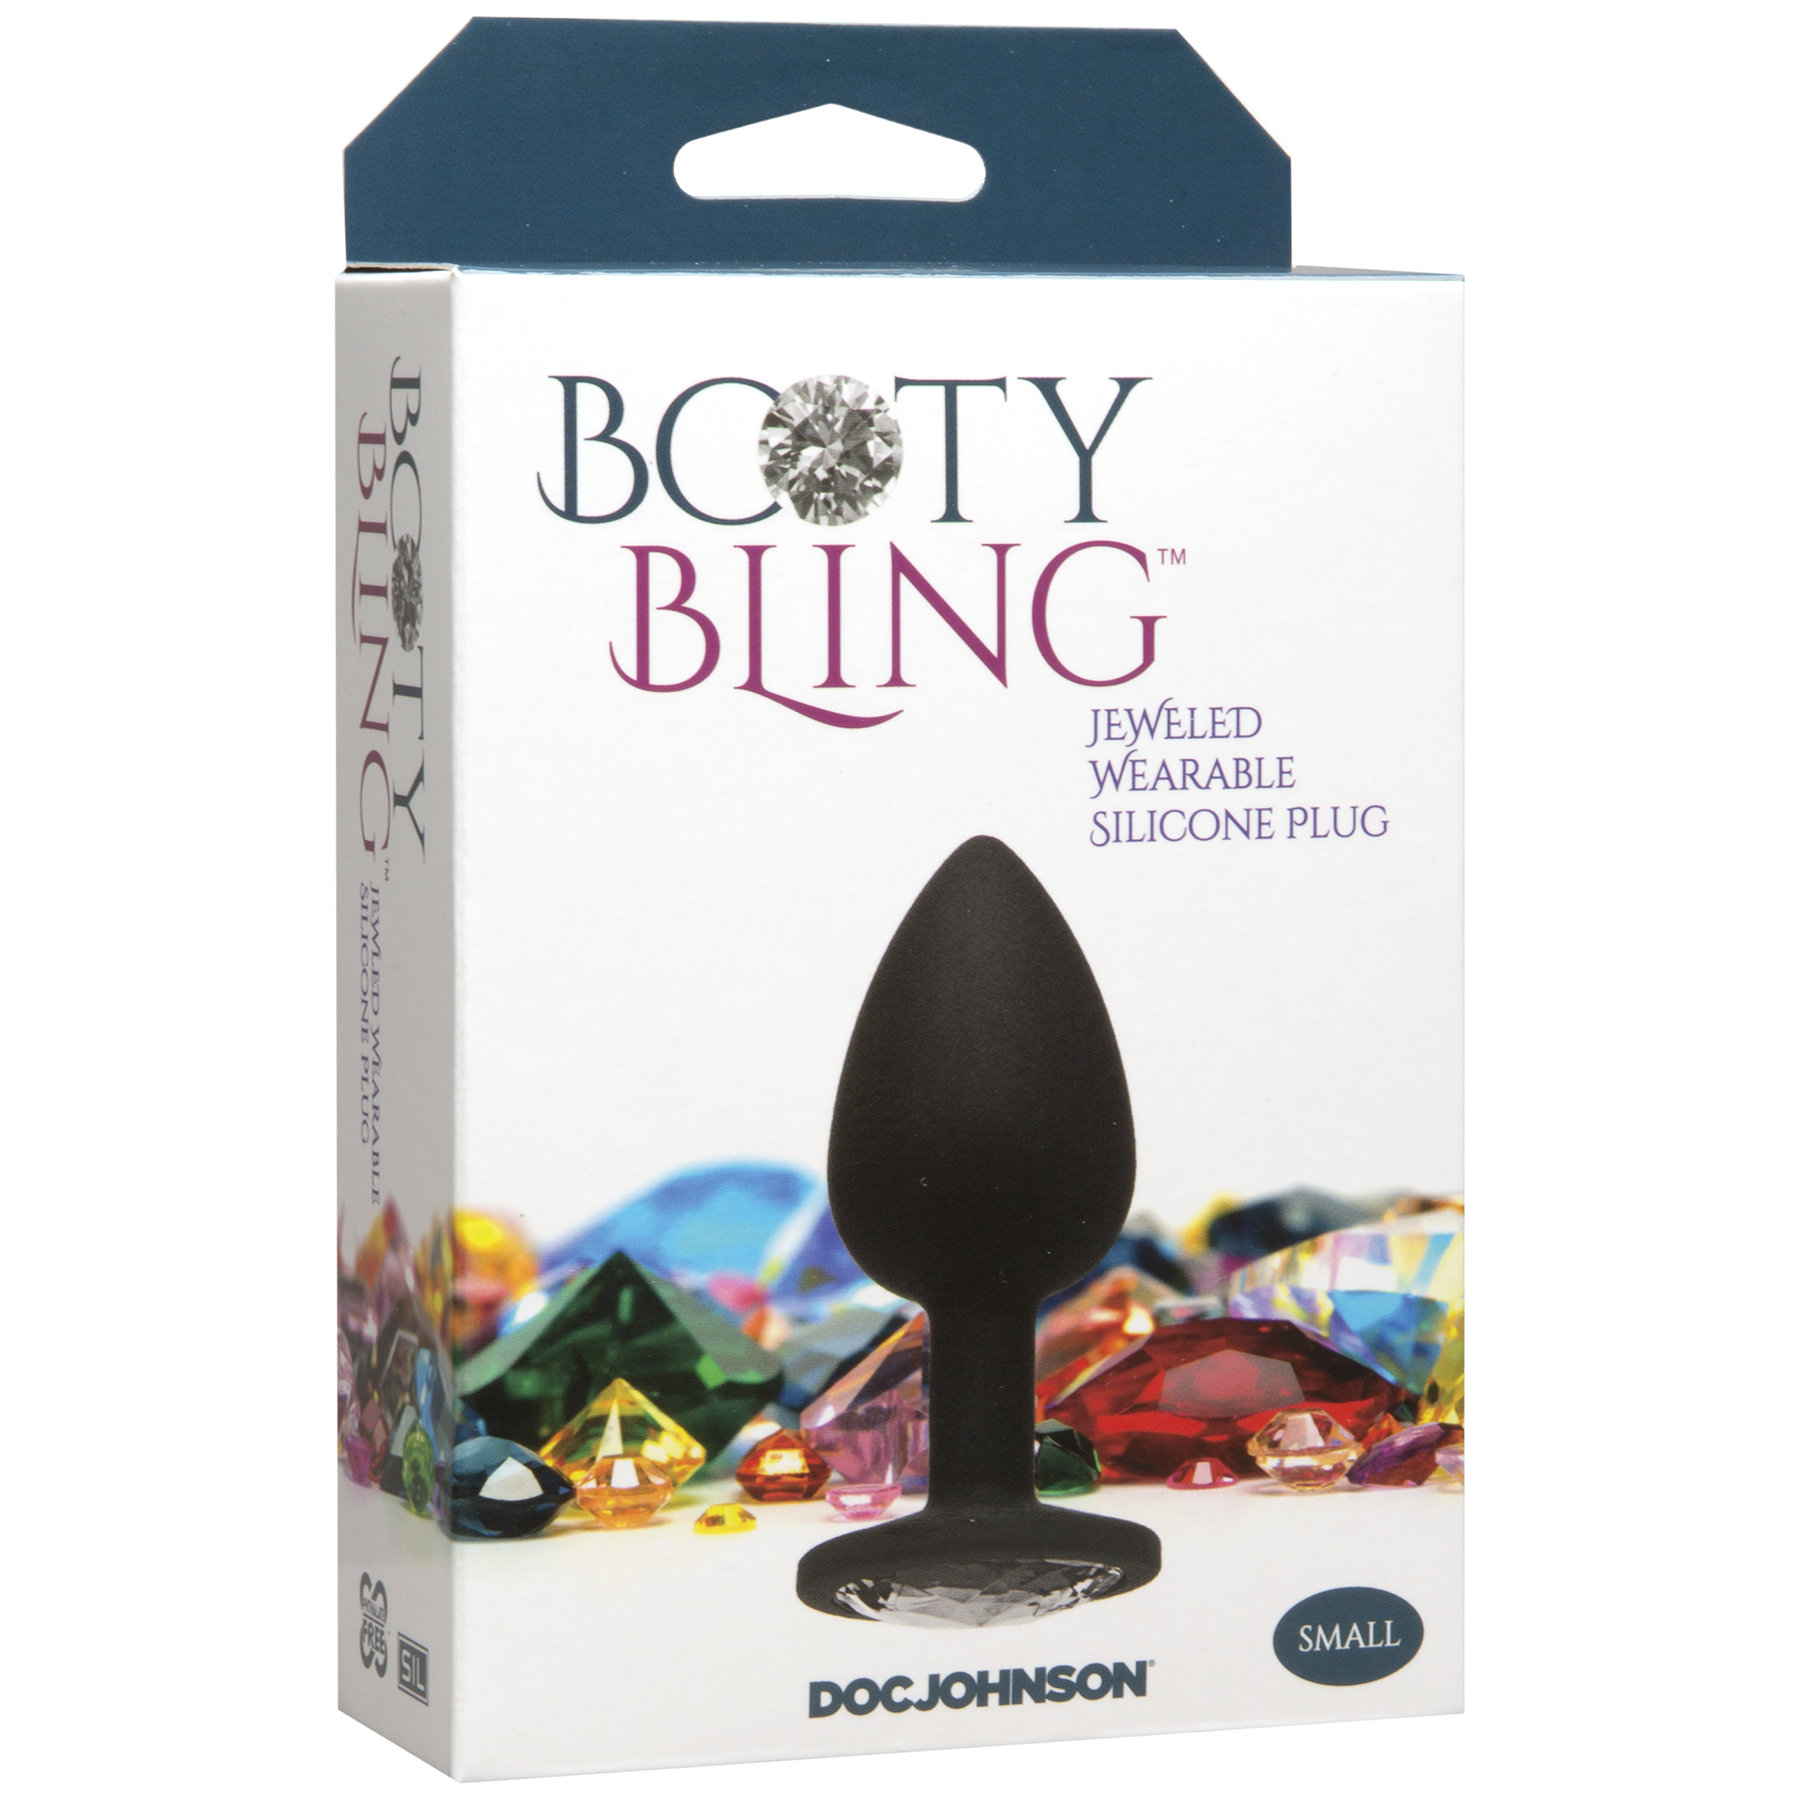 Booty Bling Plug - Silver, Small - Thorn & Feather